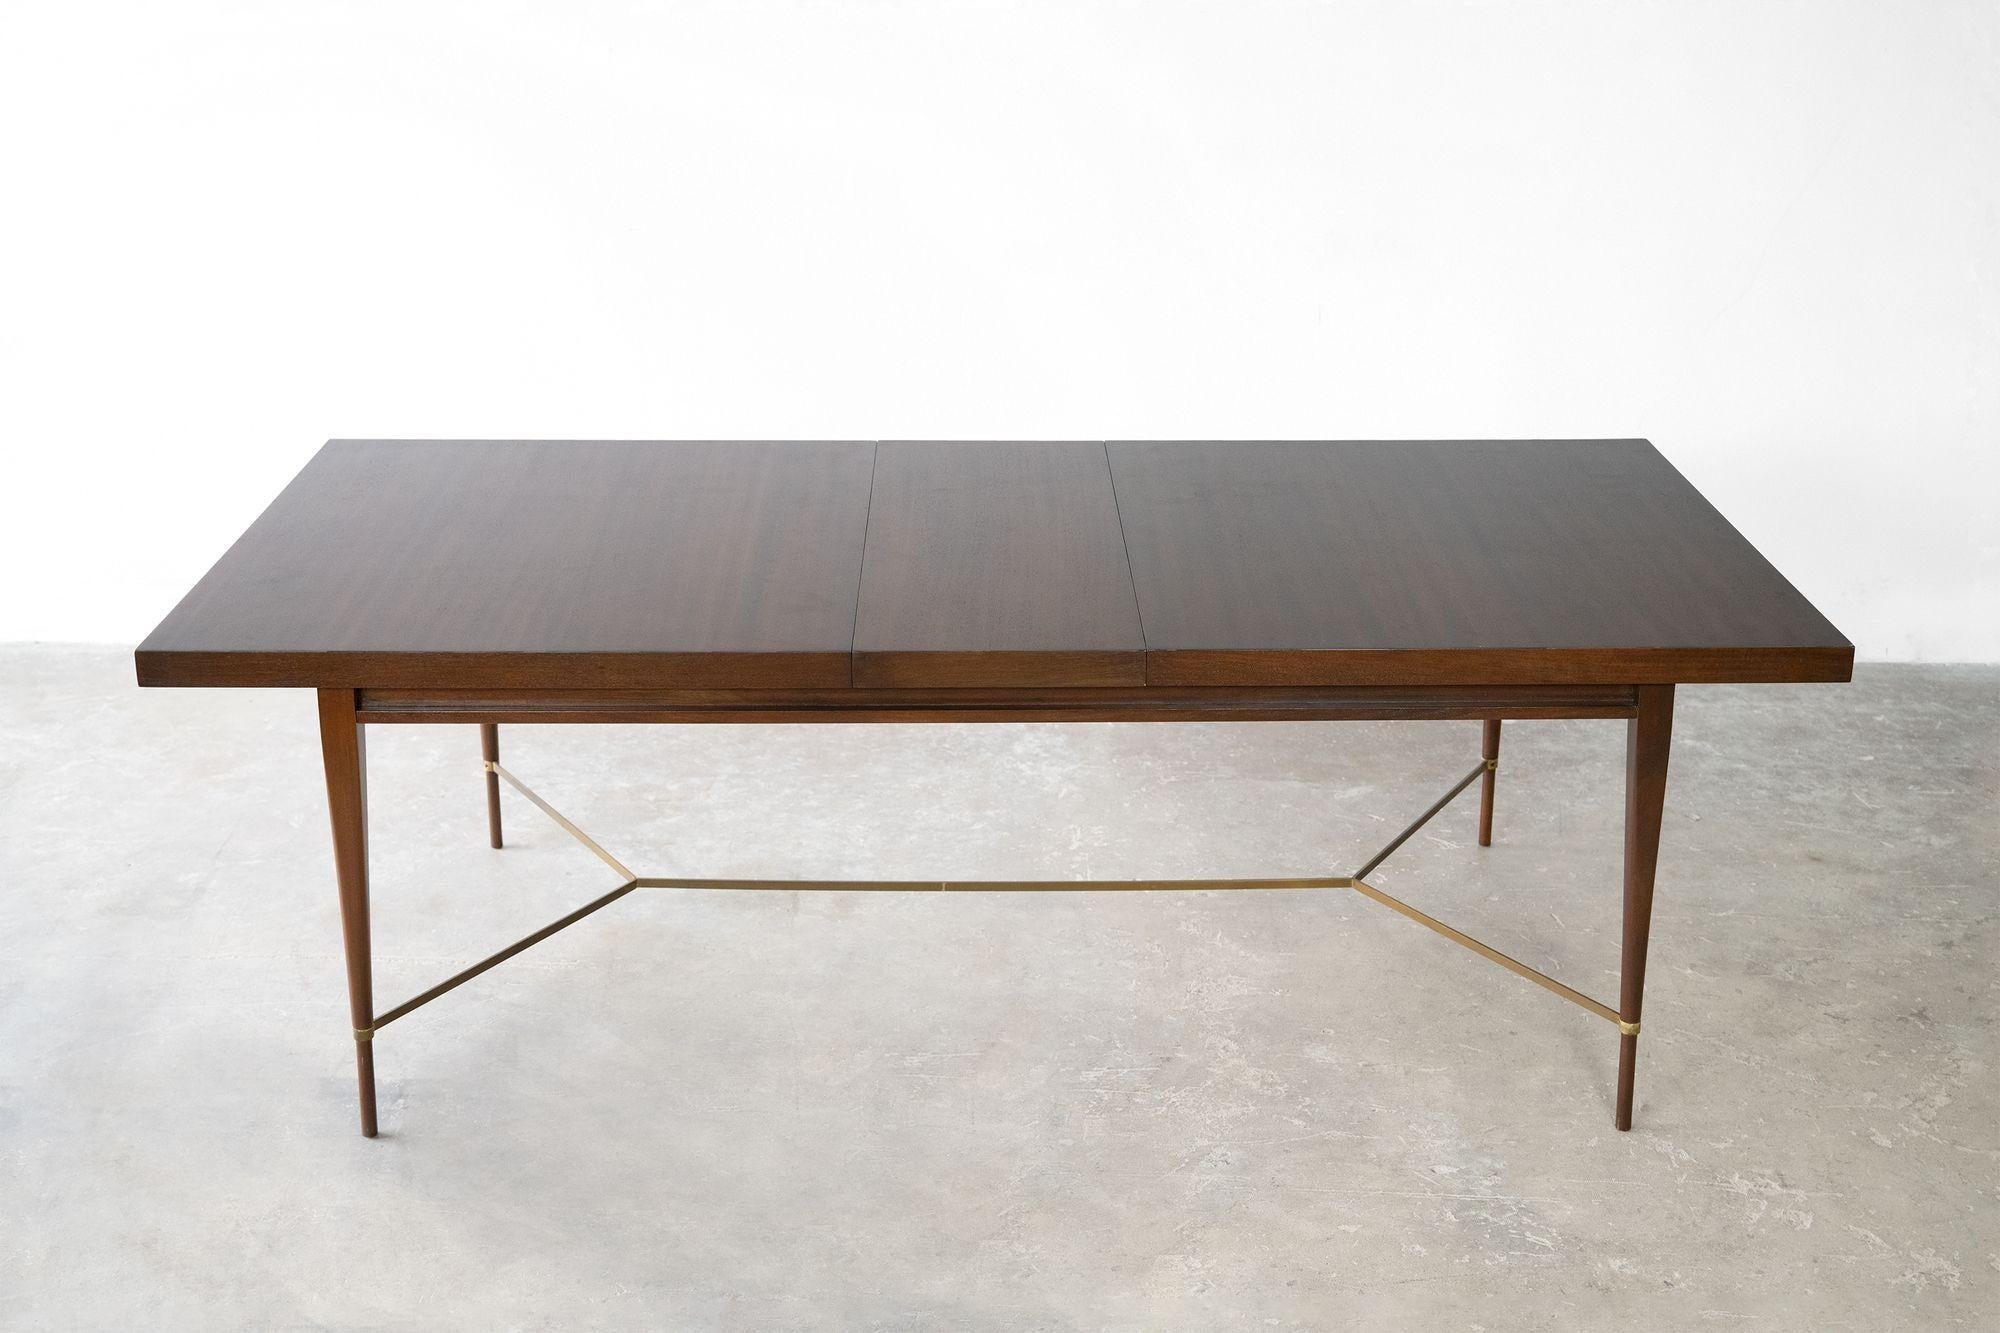 American Paul McCobb Irwin Collection Mahogany Dining Table for Calvin, 1950s